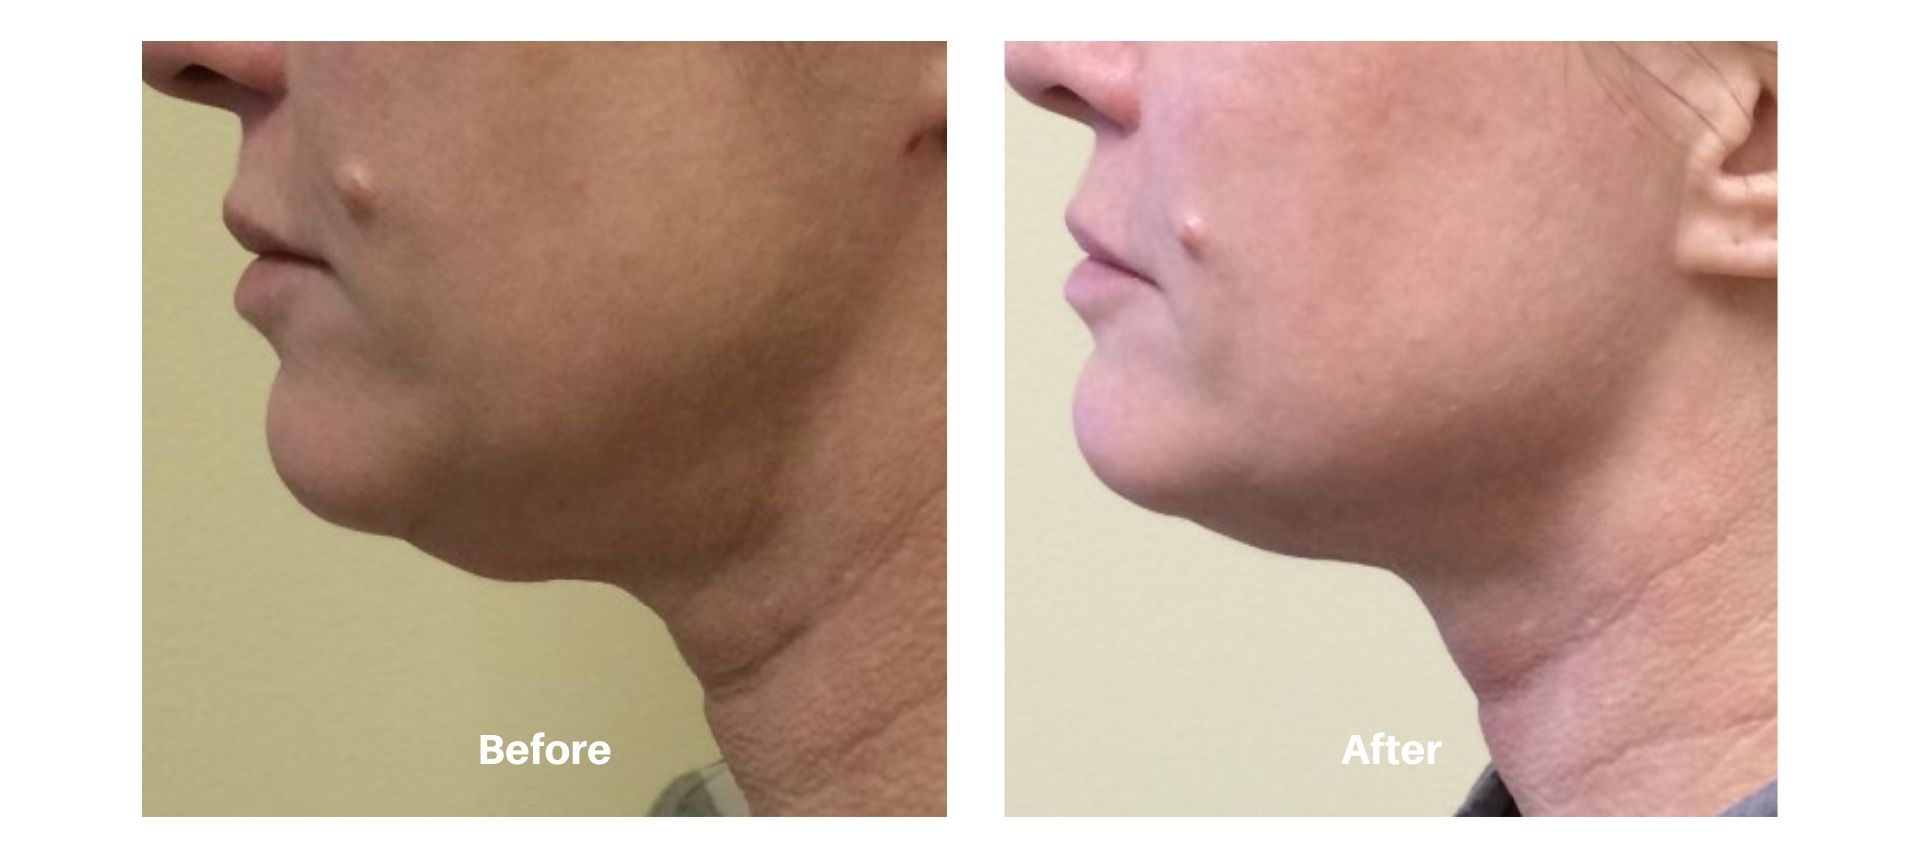 woman's before and after images from Kybella treatment at Always Beautiful.